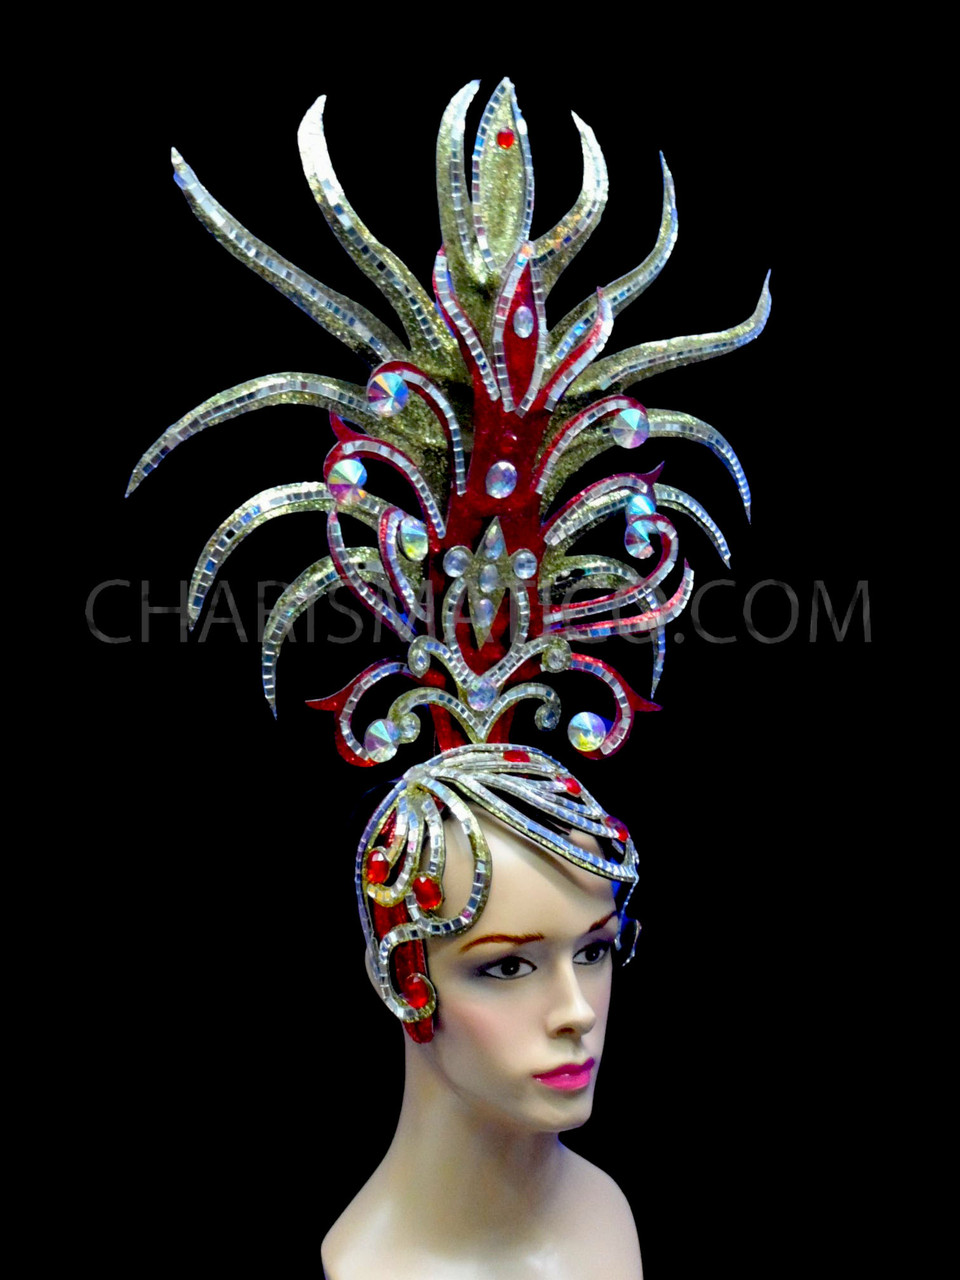 https://cdn11.bigcommerce.com/s-07991/images/stencil/1280x1280/products/938/59453/Art_Deco_Delight_Red_And_Gold_Cabaret_Drag_Queen_Diva_Headdress_DB0712_2__54618.1607058461.jpg?c=2